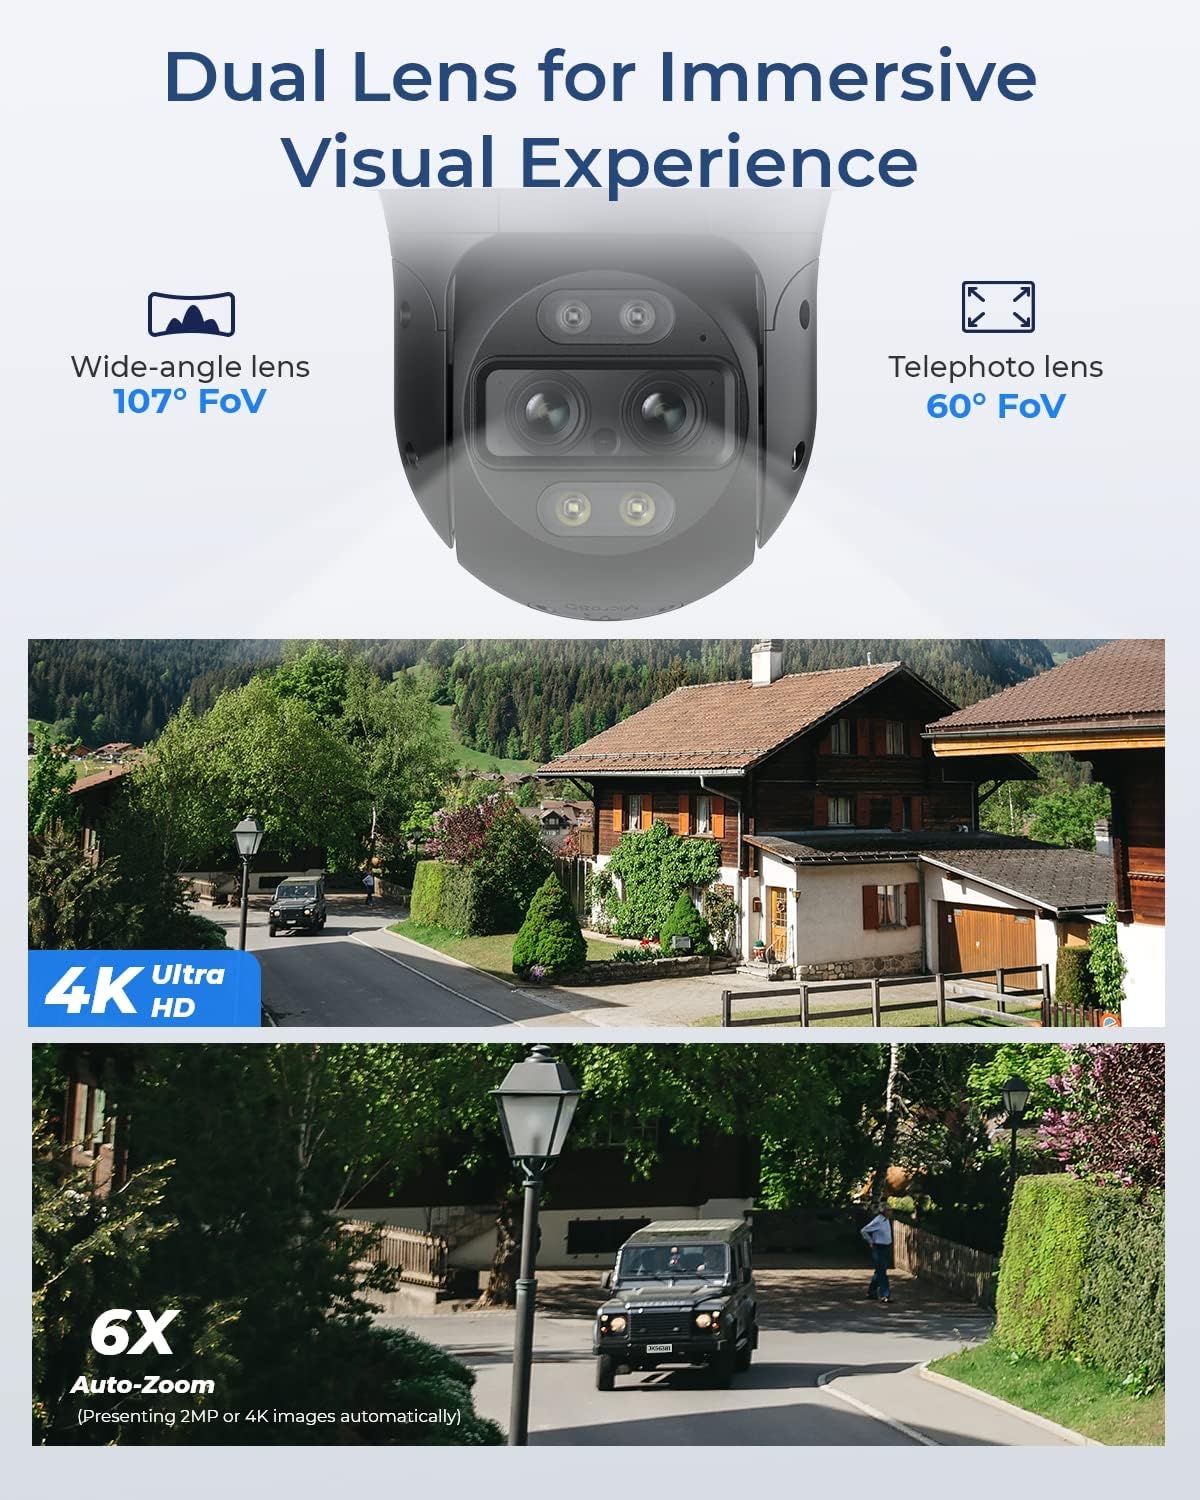 REOLINK RLC-830A IP Pan-Tilt Camera: High-Resolution 8MP (3840 x 2160) - 25fps, 360° Rotation, Night Vision Range up to 30m, Built-in Microphone, Motion Detection with Human and Vehicle Detection, Free Phone App Included - Spy-shop.com